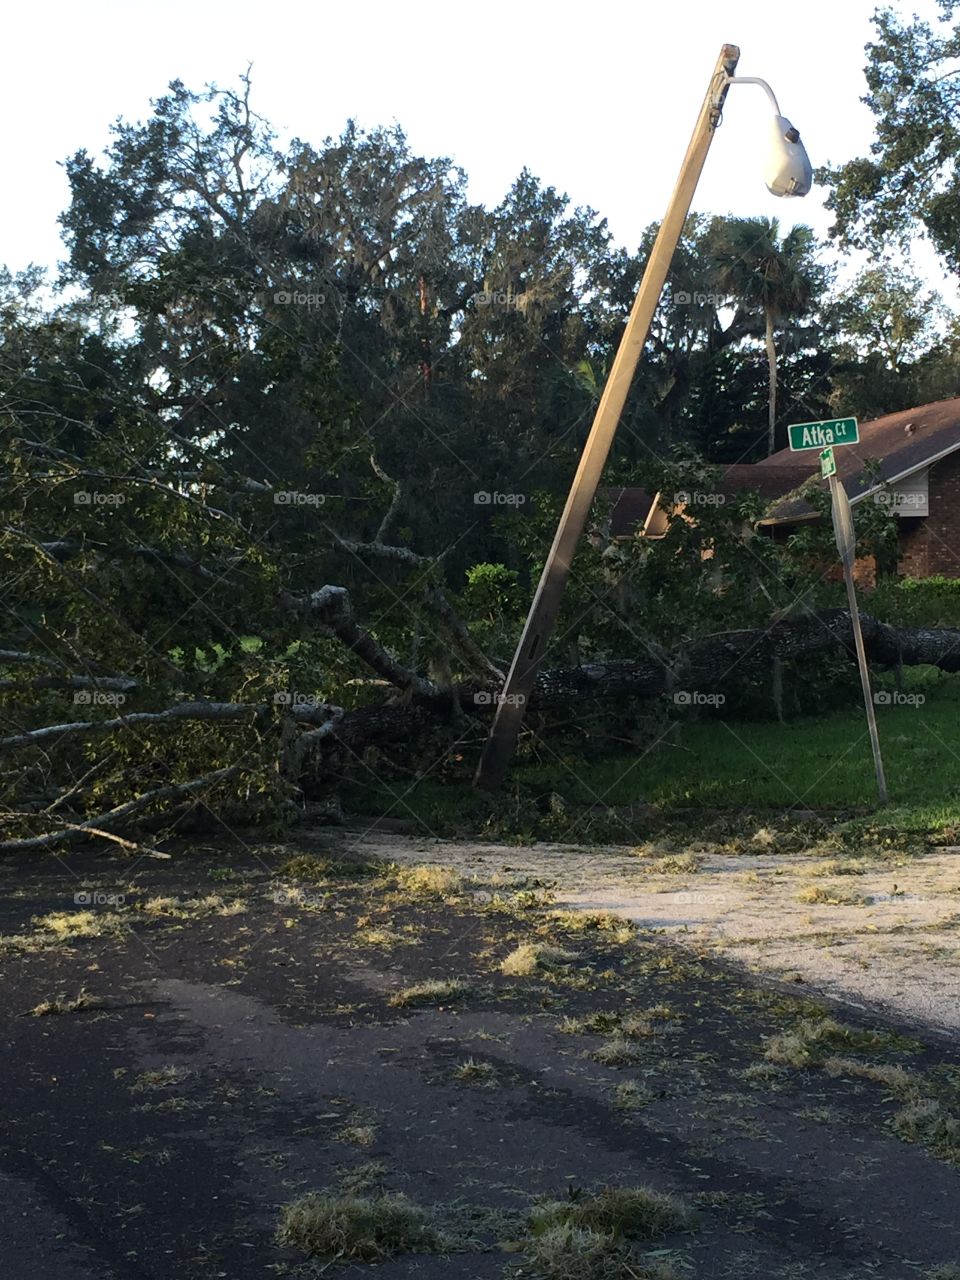 Hurricane Matthew downed many large oak trees in the northeast Florida city of Ormond Beach, taking down this streetlight in the Halifax Plantation neighborhood, in Volusia County.